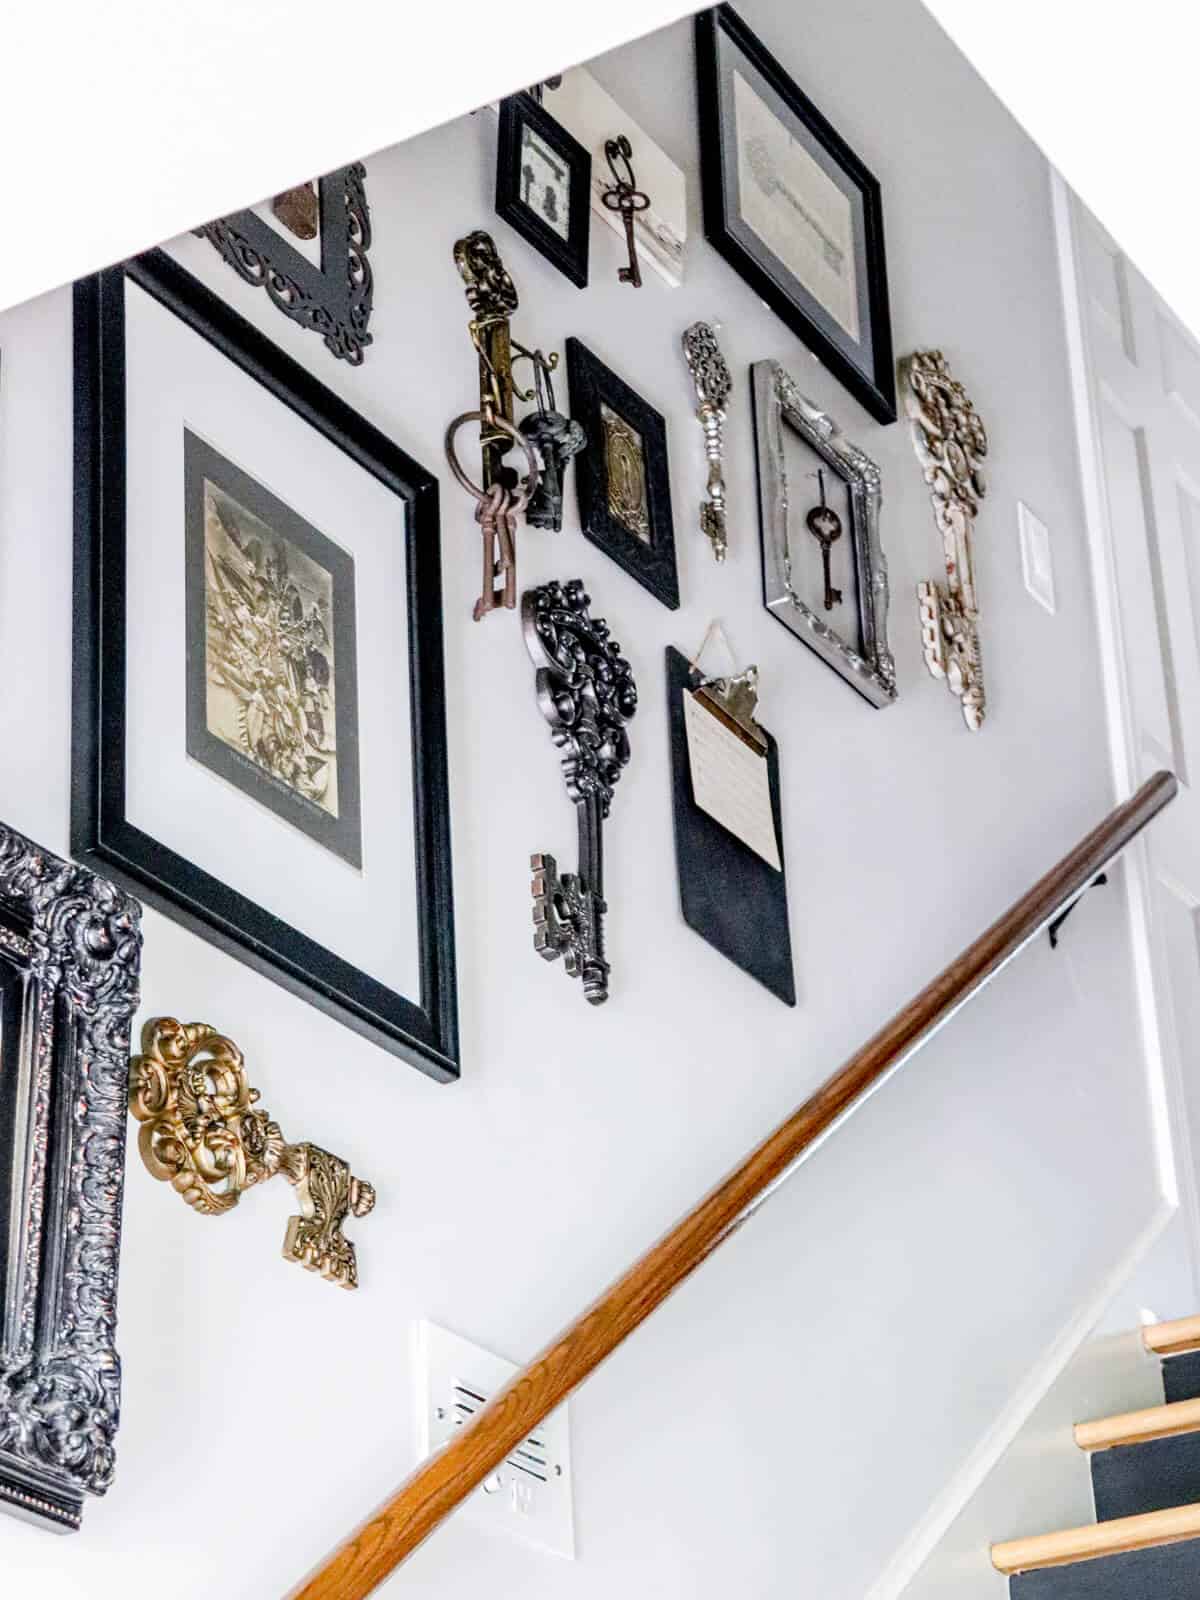 Gallery wall made up of black and white key decor